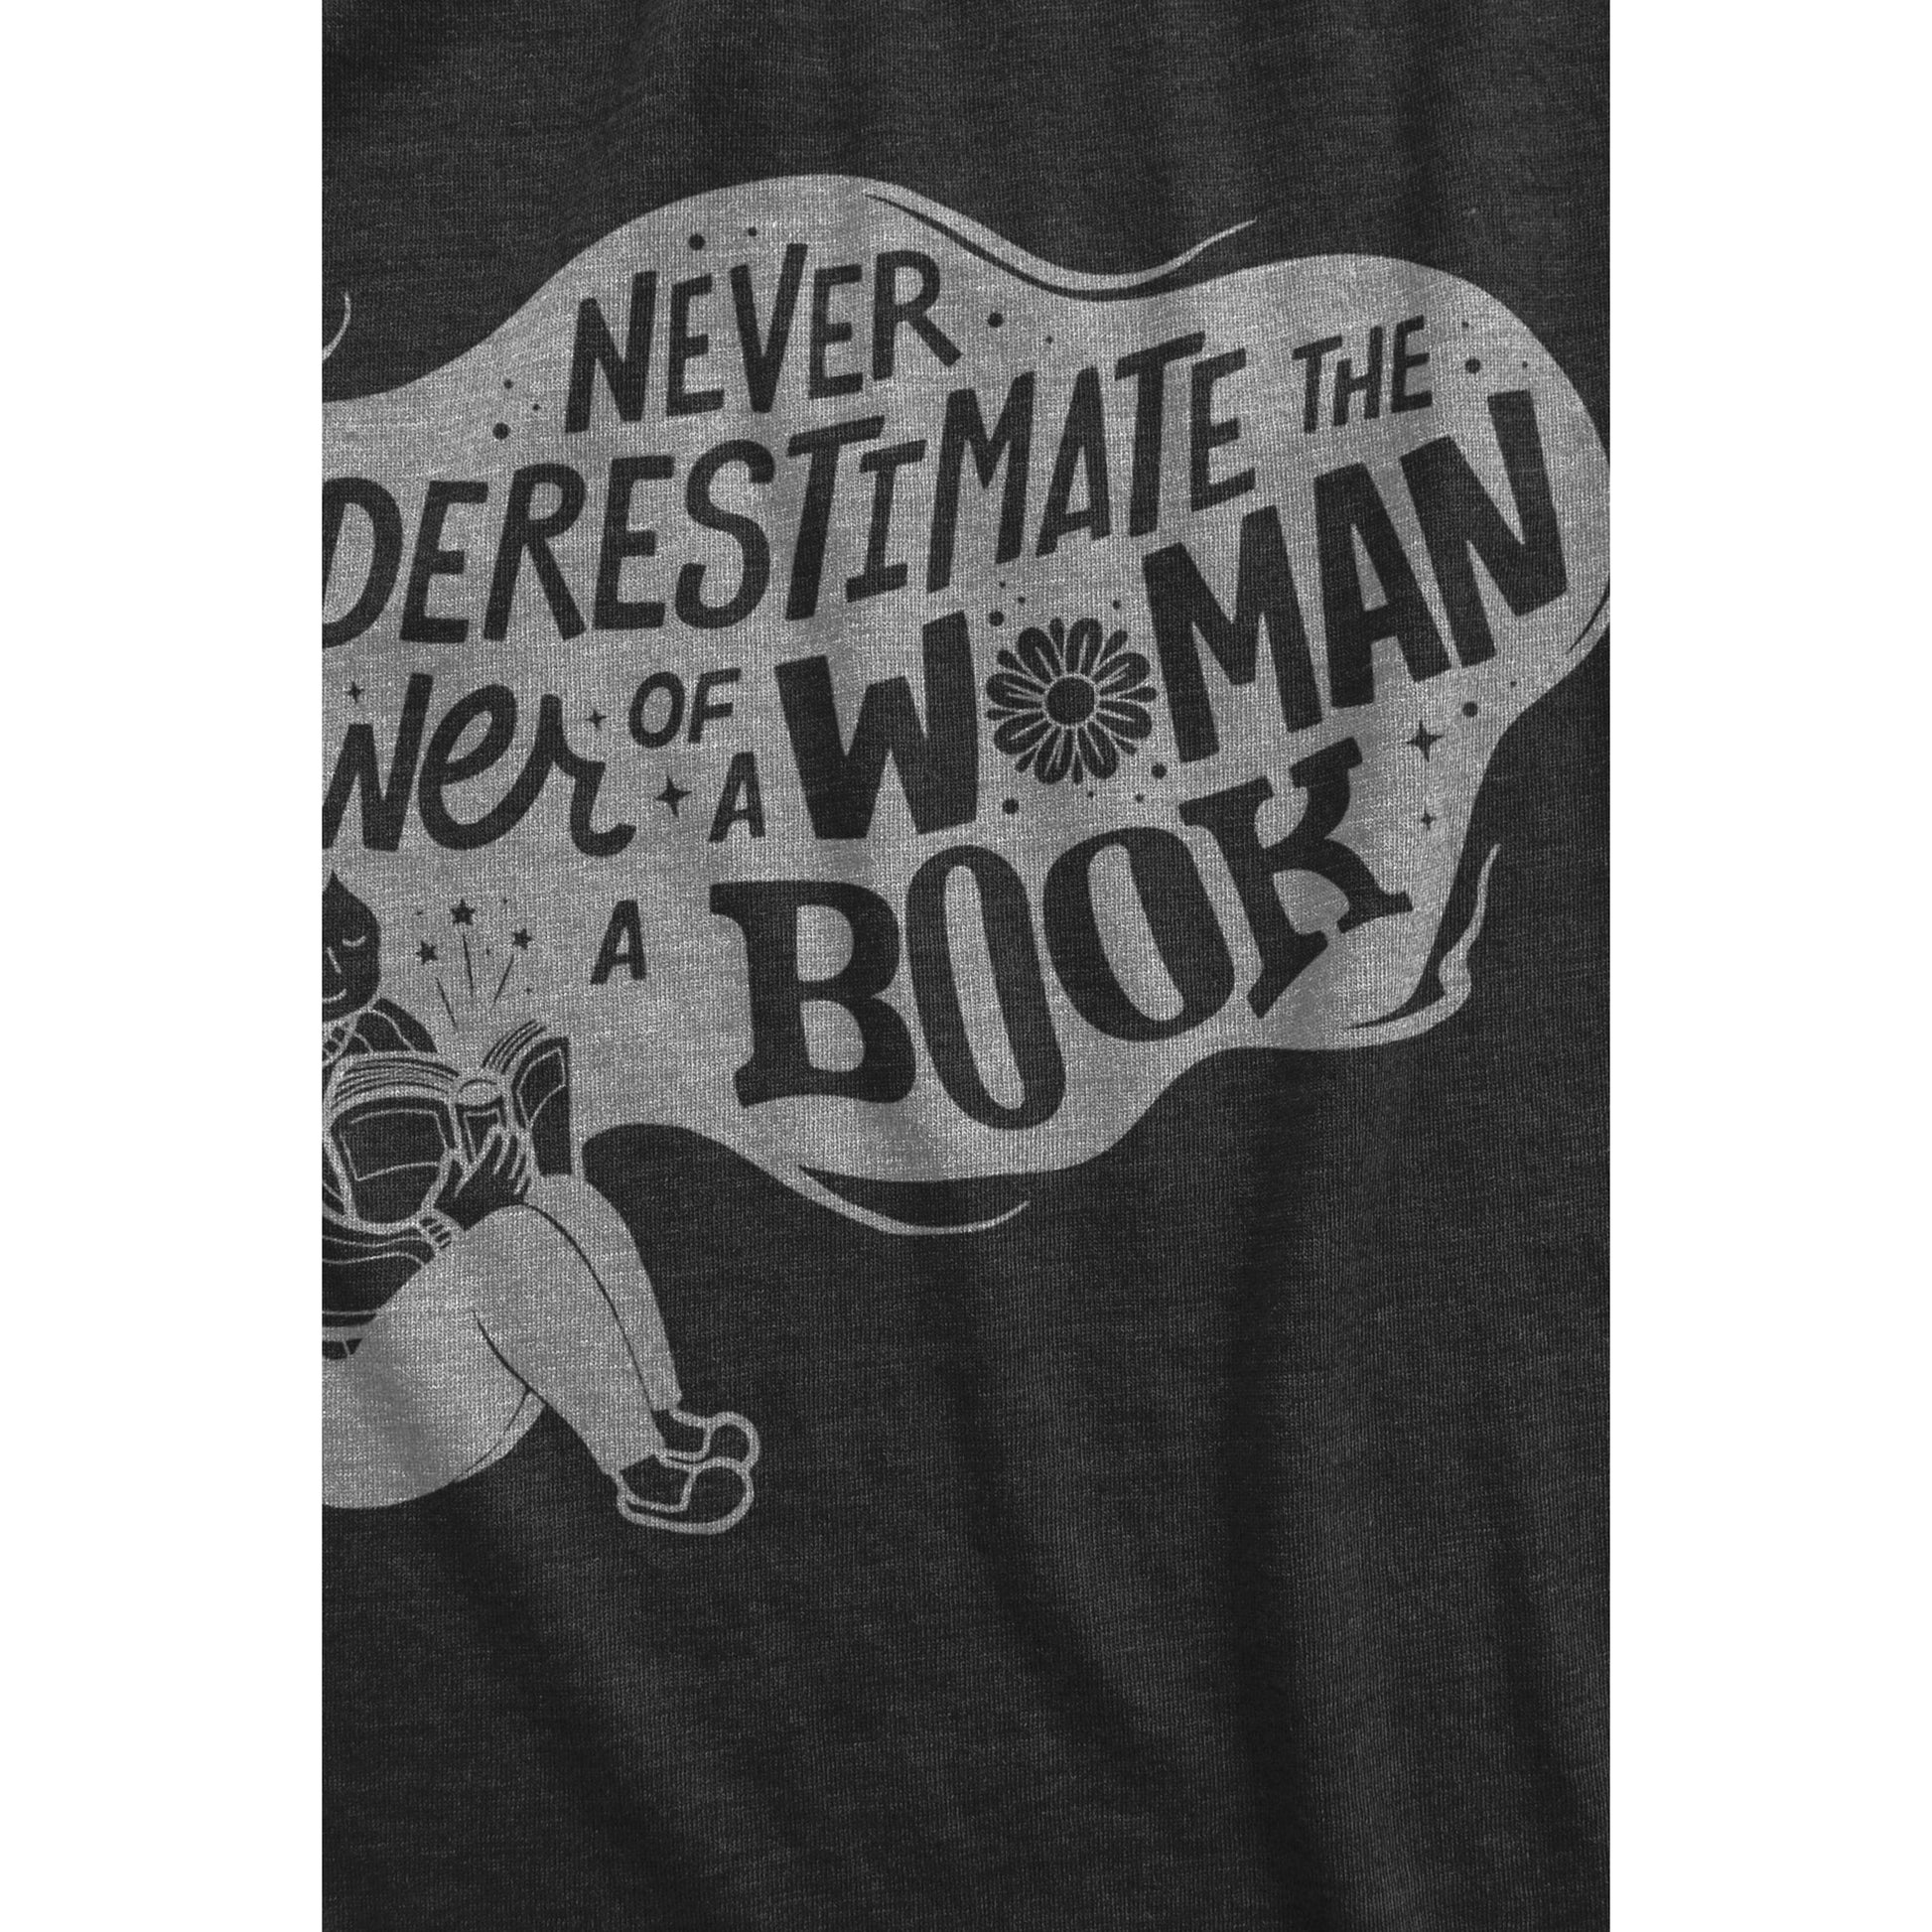 Never Underestimate The Power Of A Woman With Books - threadtank | stories you can wear